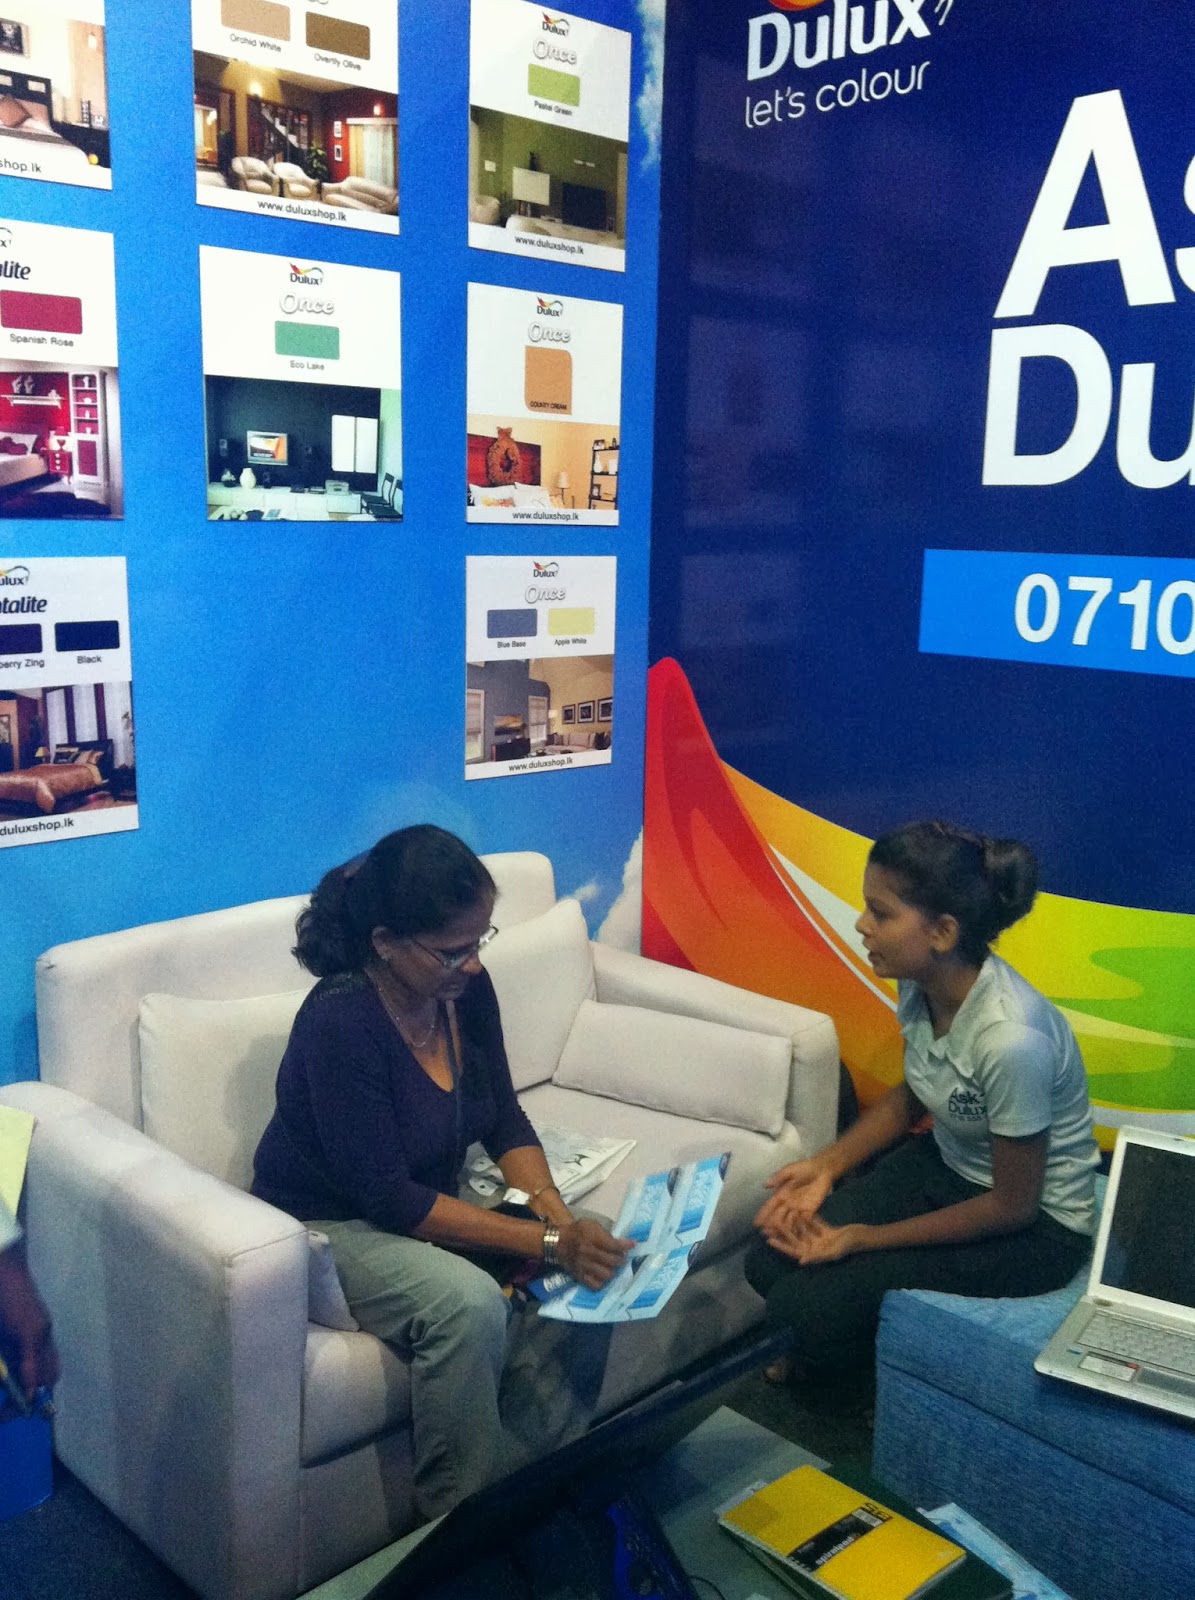 Visitors at the Dulux consultation lounge seek advice on paint choices .